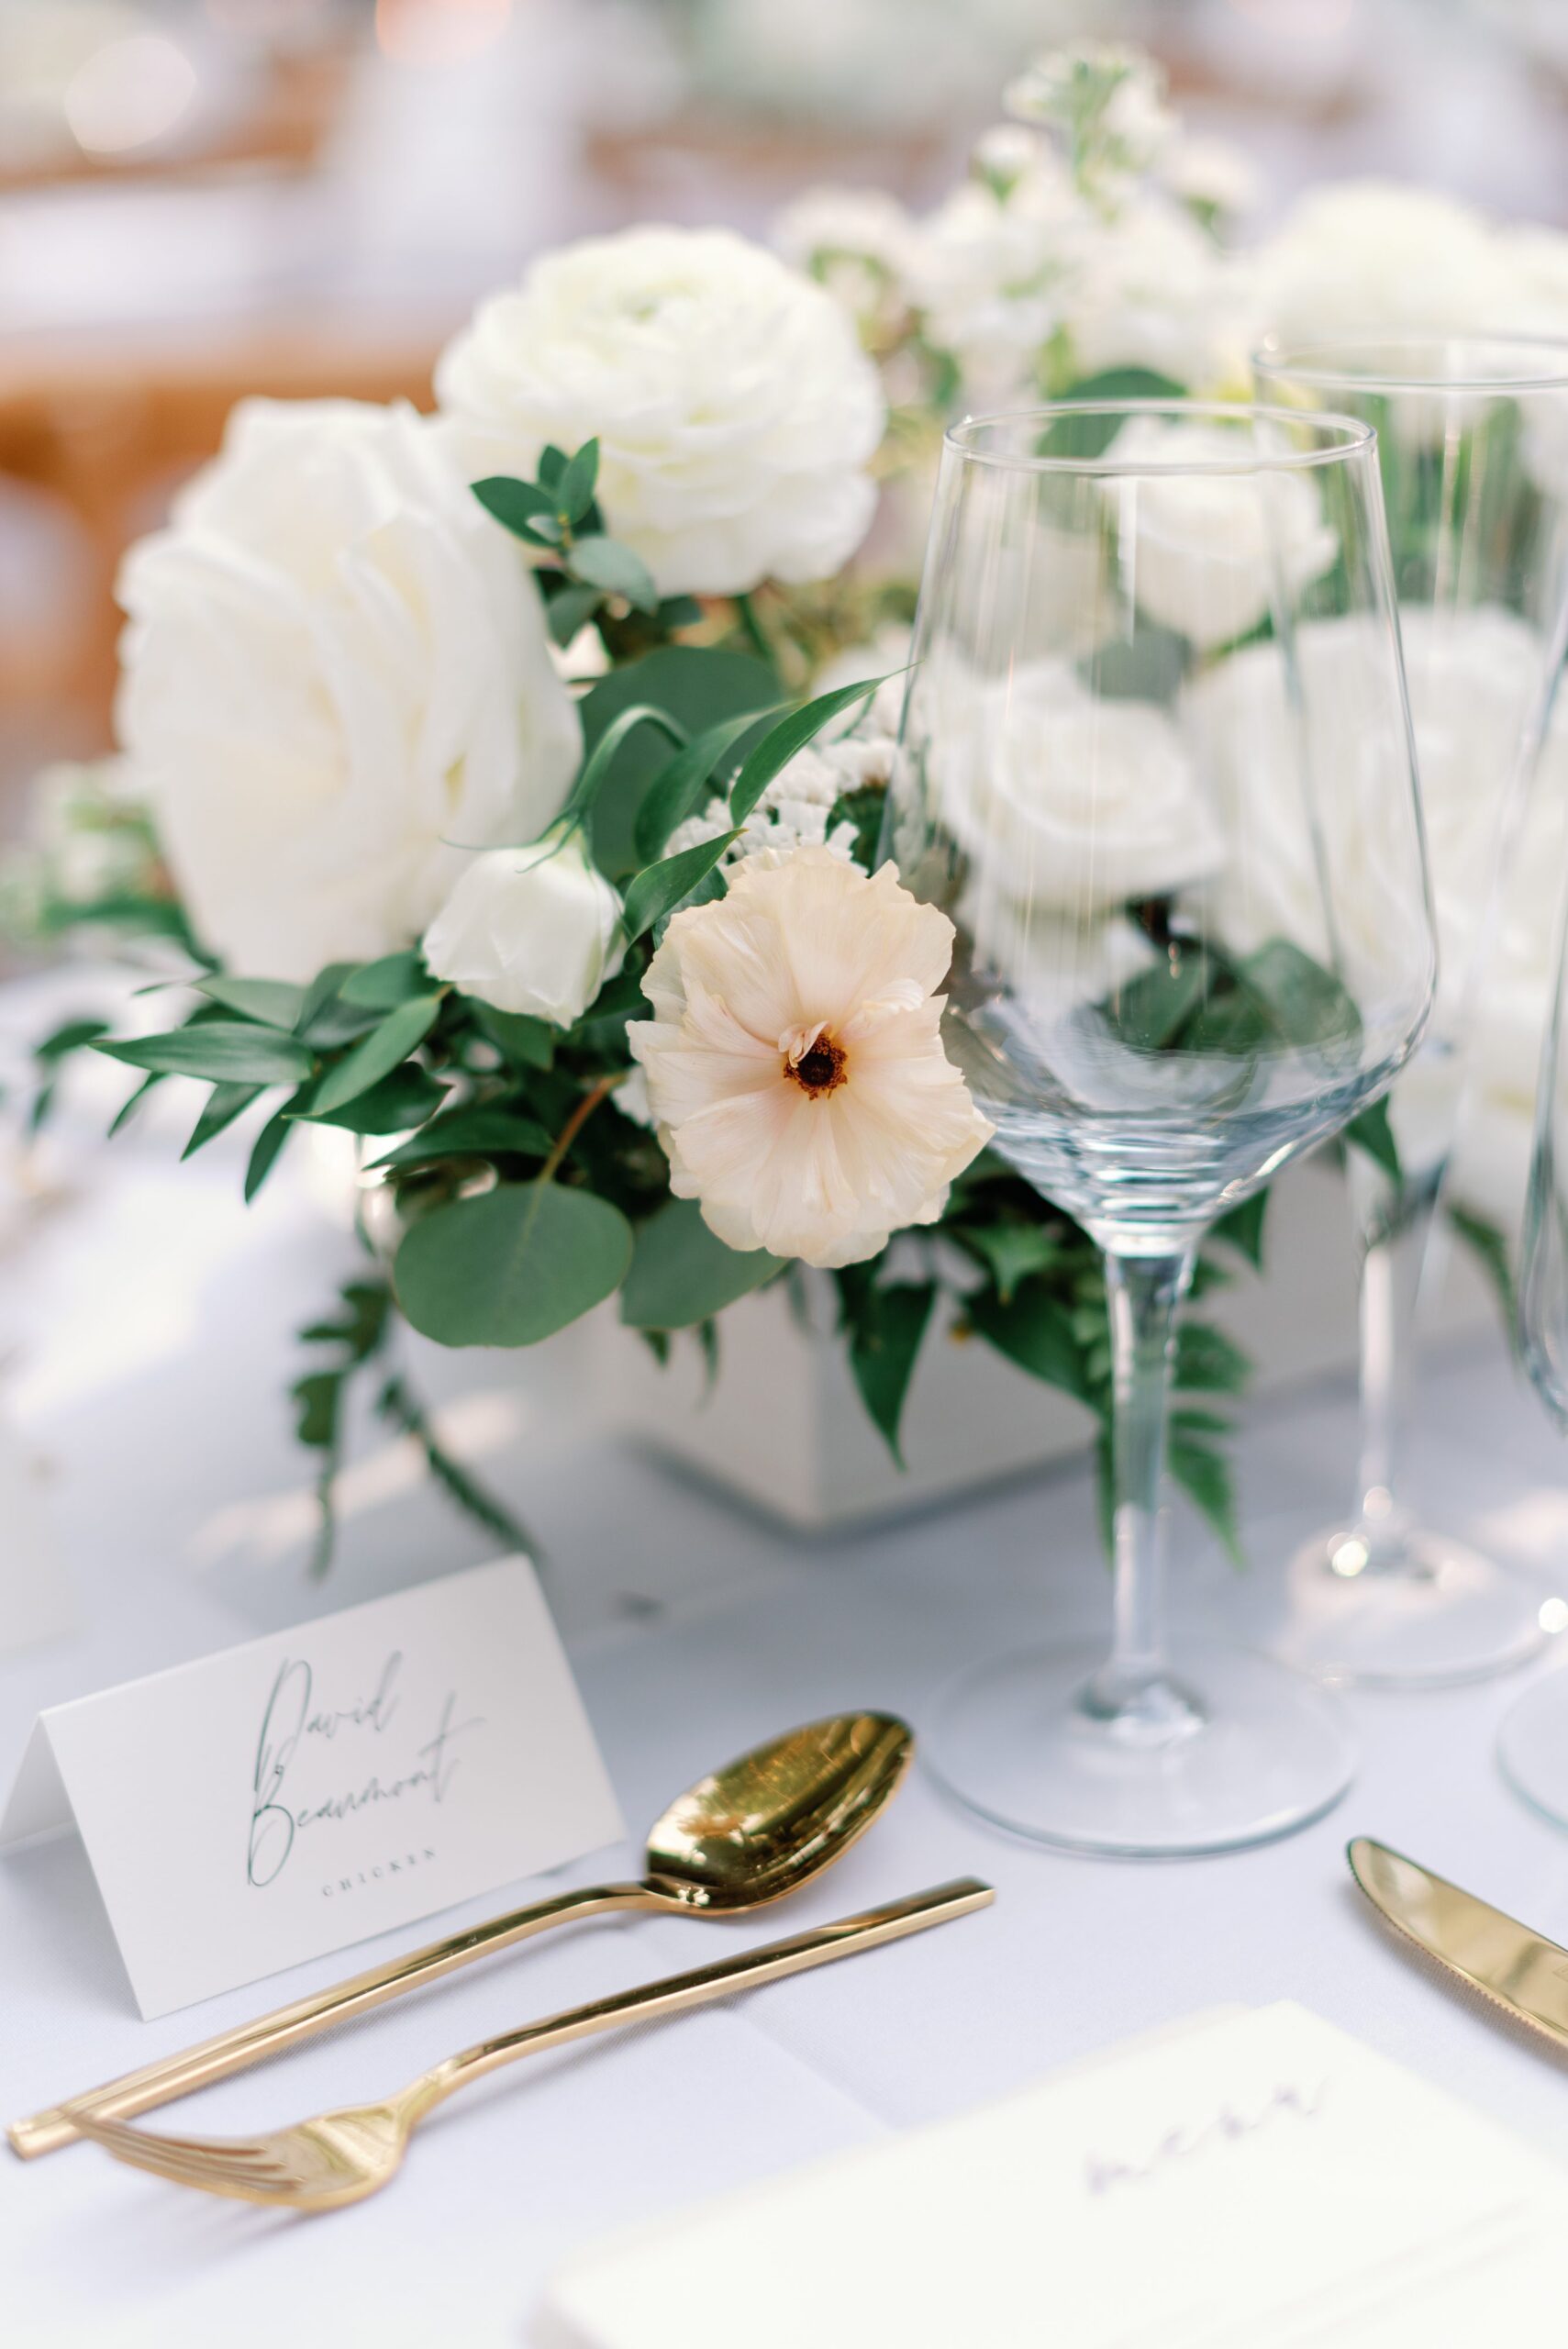 White and gold wedding details.